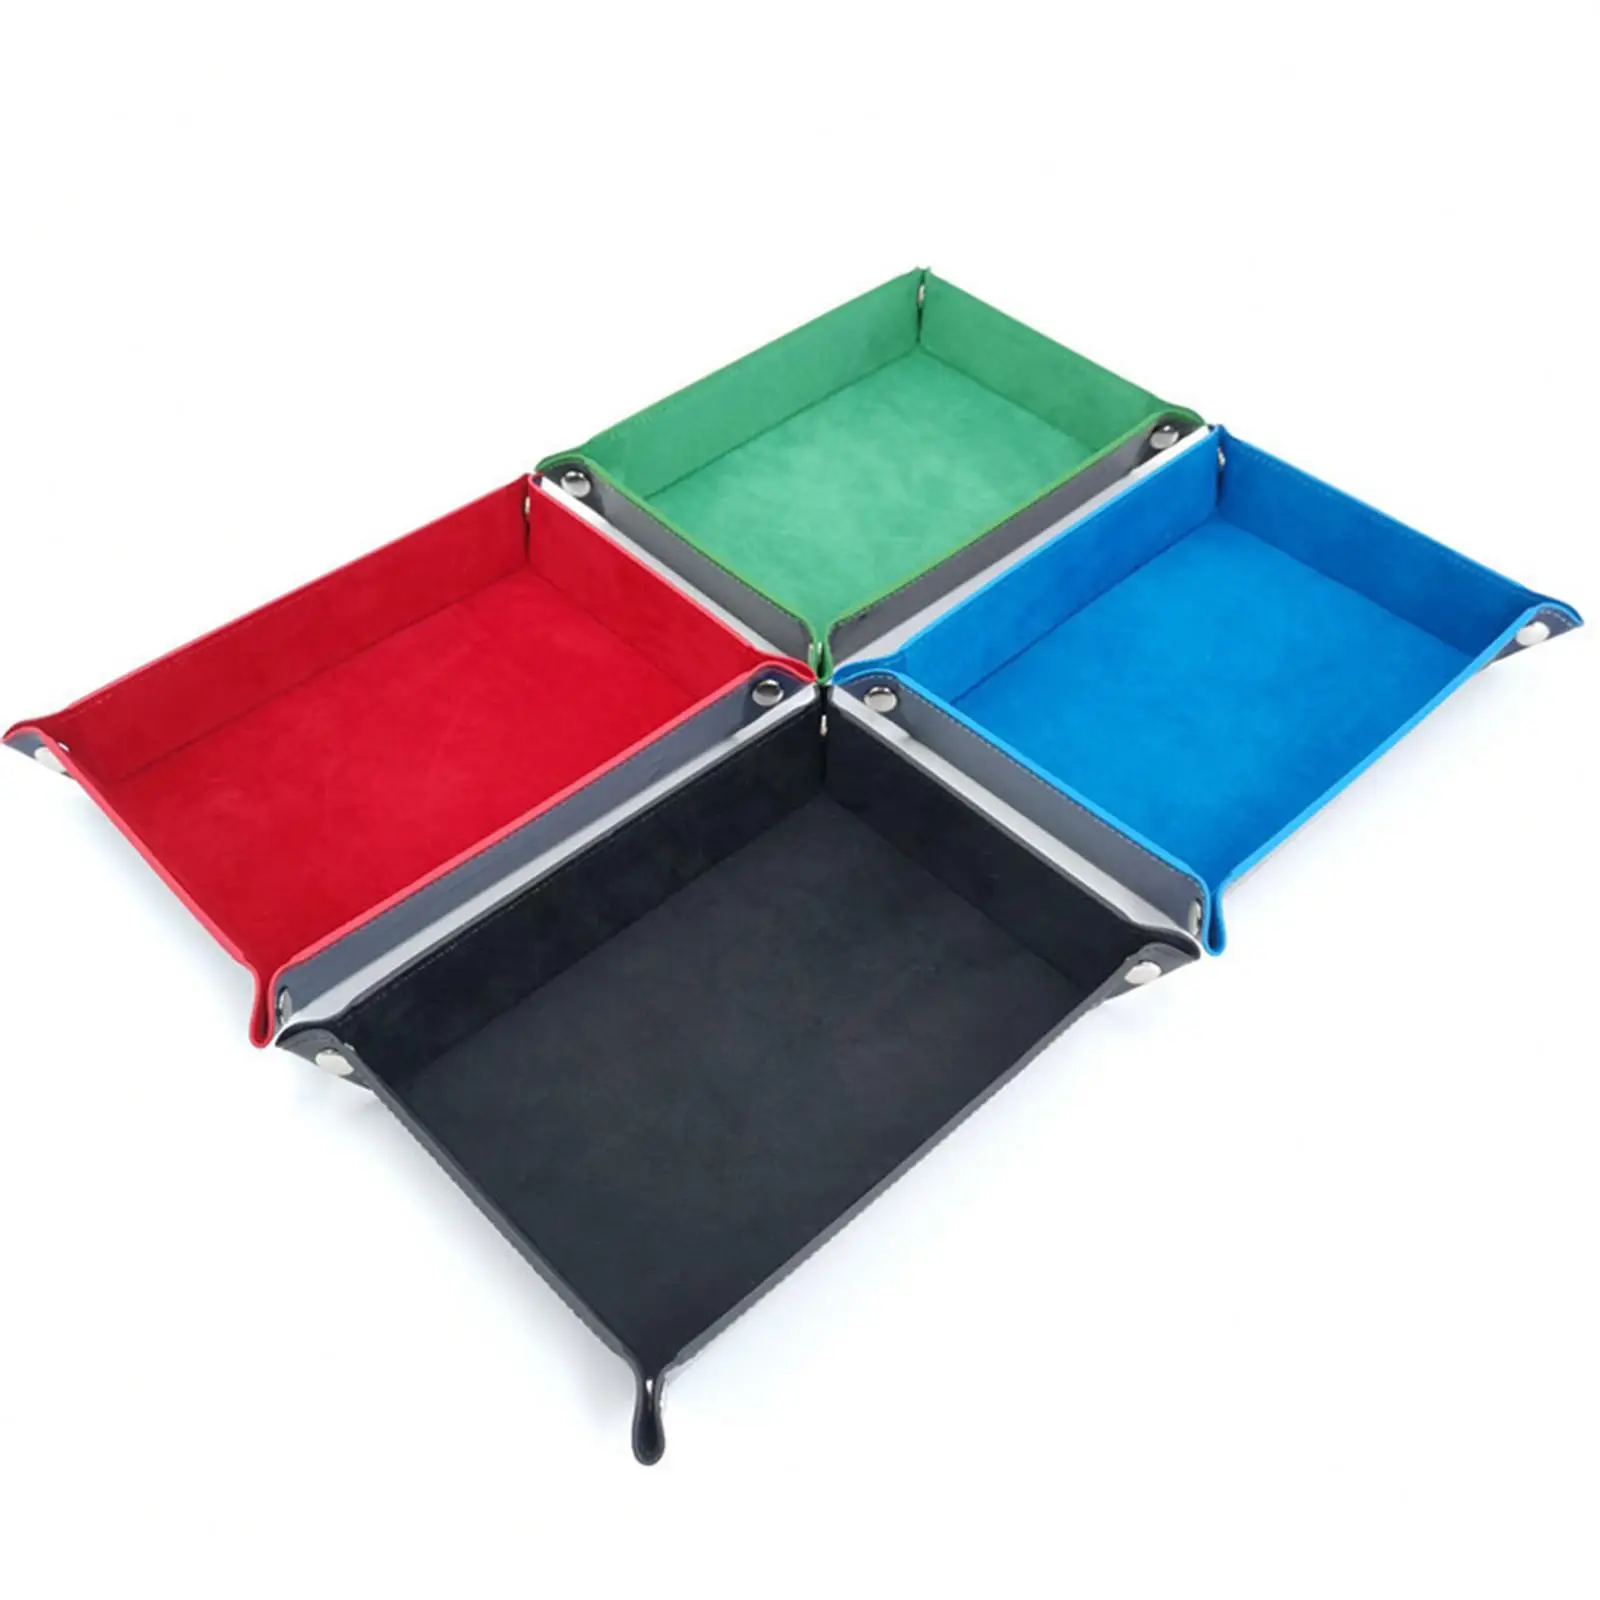 Folding Dice Tray Set Flannel Rectangle PU Leather Portable Reinforced Bottom Large for Board Games Office Desk